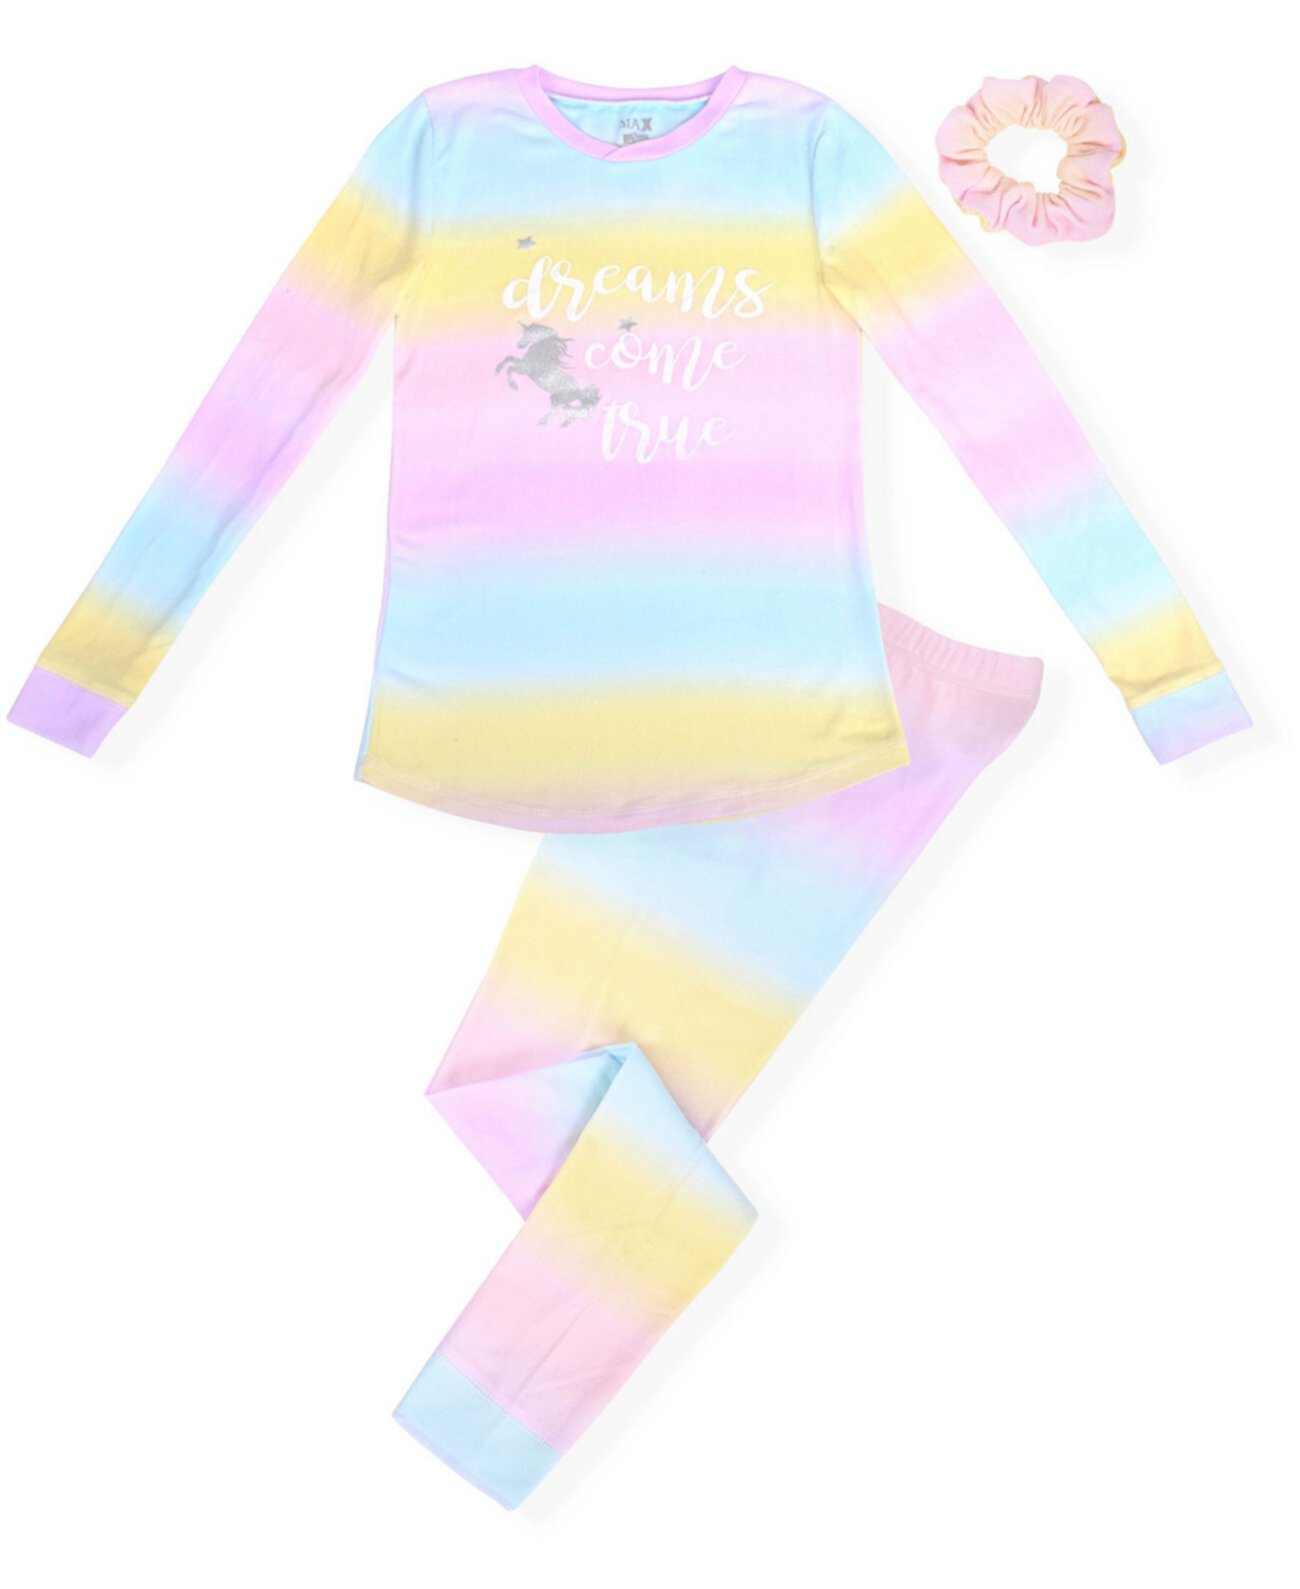 Big Girl's Cosy Tight Fit Pajama Set Ombre Print with Dreams Screen and Scrunchie Max & Olivia